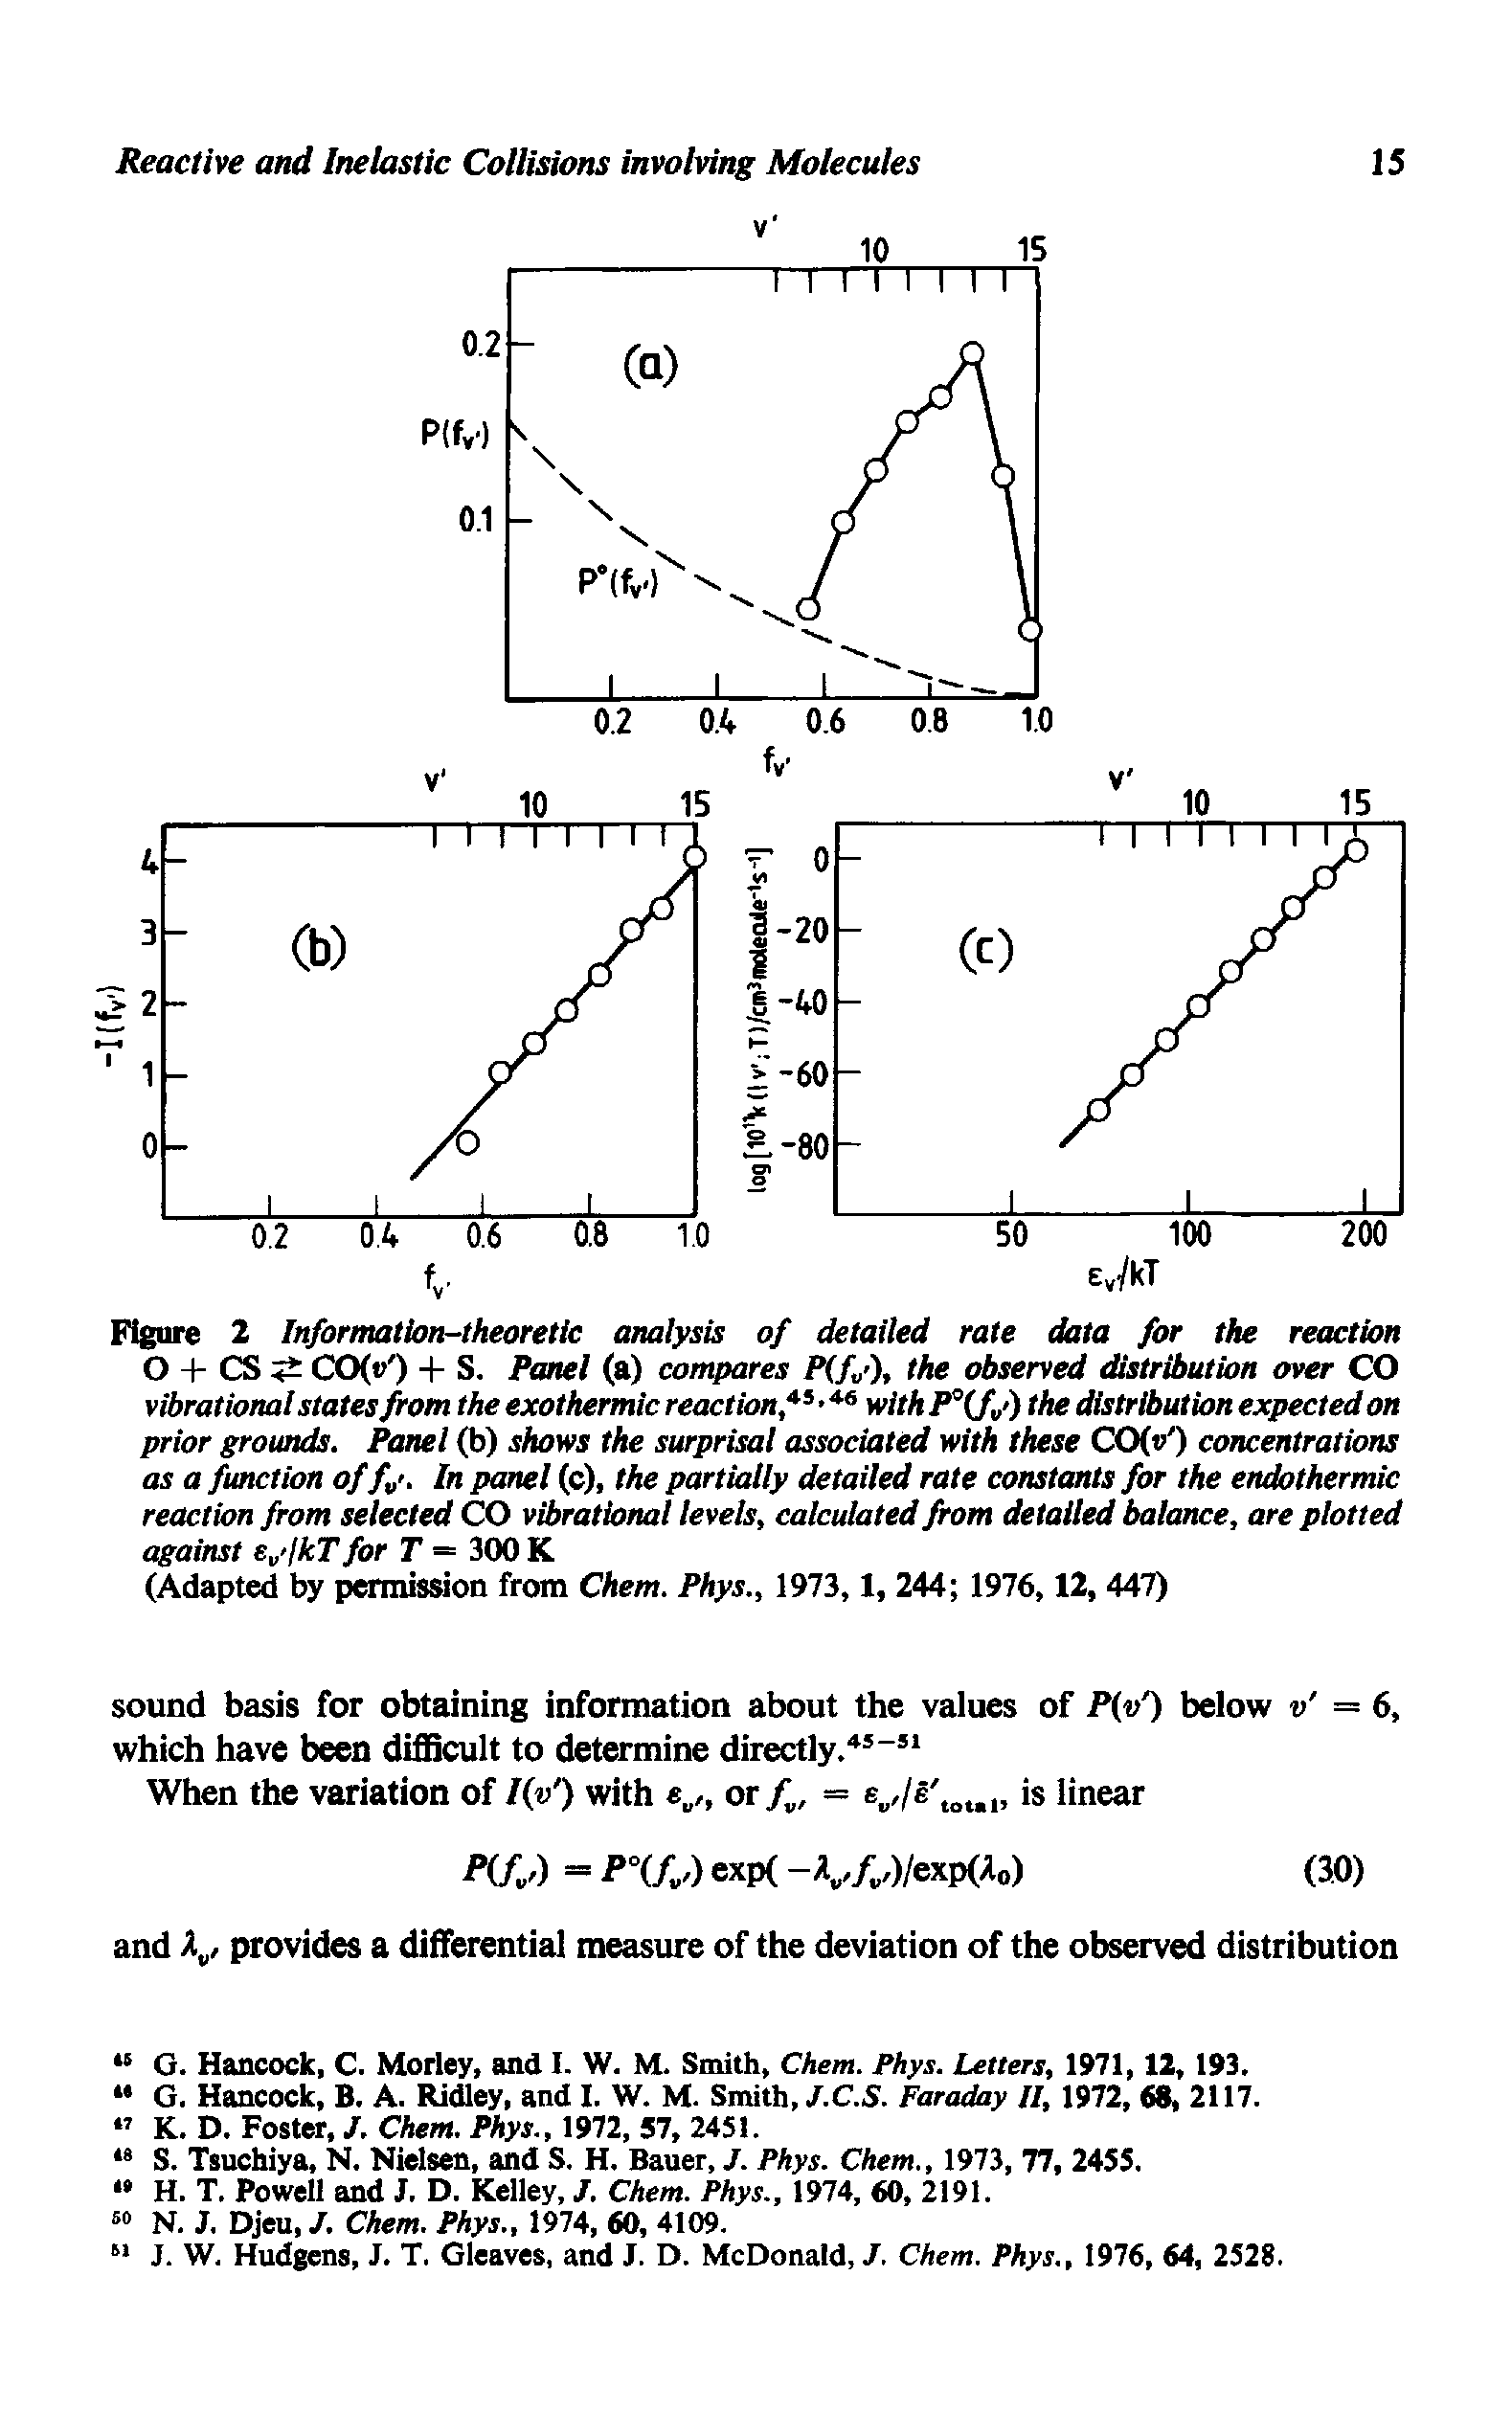 Figure 2 Information-theoretic analysis of detailed rate data foe the reaction O + CS CO( ) + S. Panel (a) compares P(f ), the observed distributUm over CO vibrational states from the exothermic reaction, > with P°(f/) the ittstrStution expected on prior grounds. Panel (b) shows the surprisal associated with these CO(<0 concentrations as a function of f. In panel (c), the partially detailed rate constants for the endothermic reaction from selected CO v rational levels, calculated from detailed balance, are plotted against e >jhTfor T — 300 K...